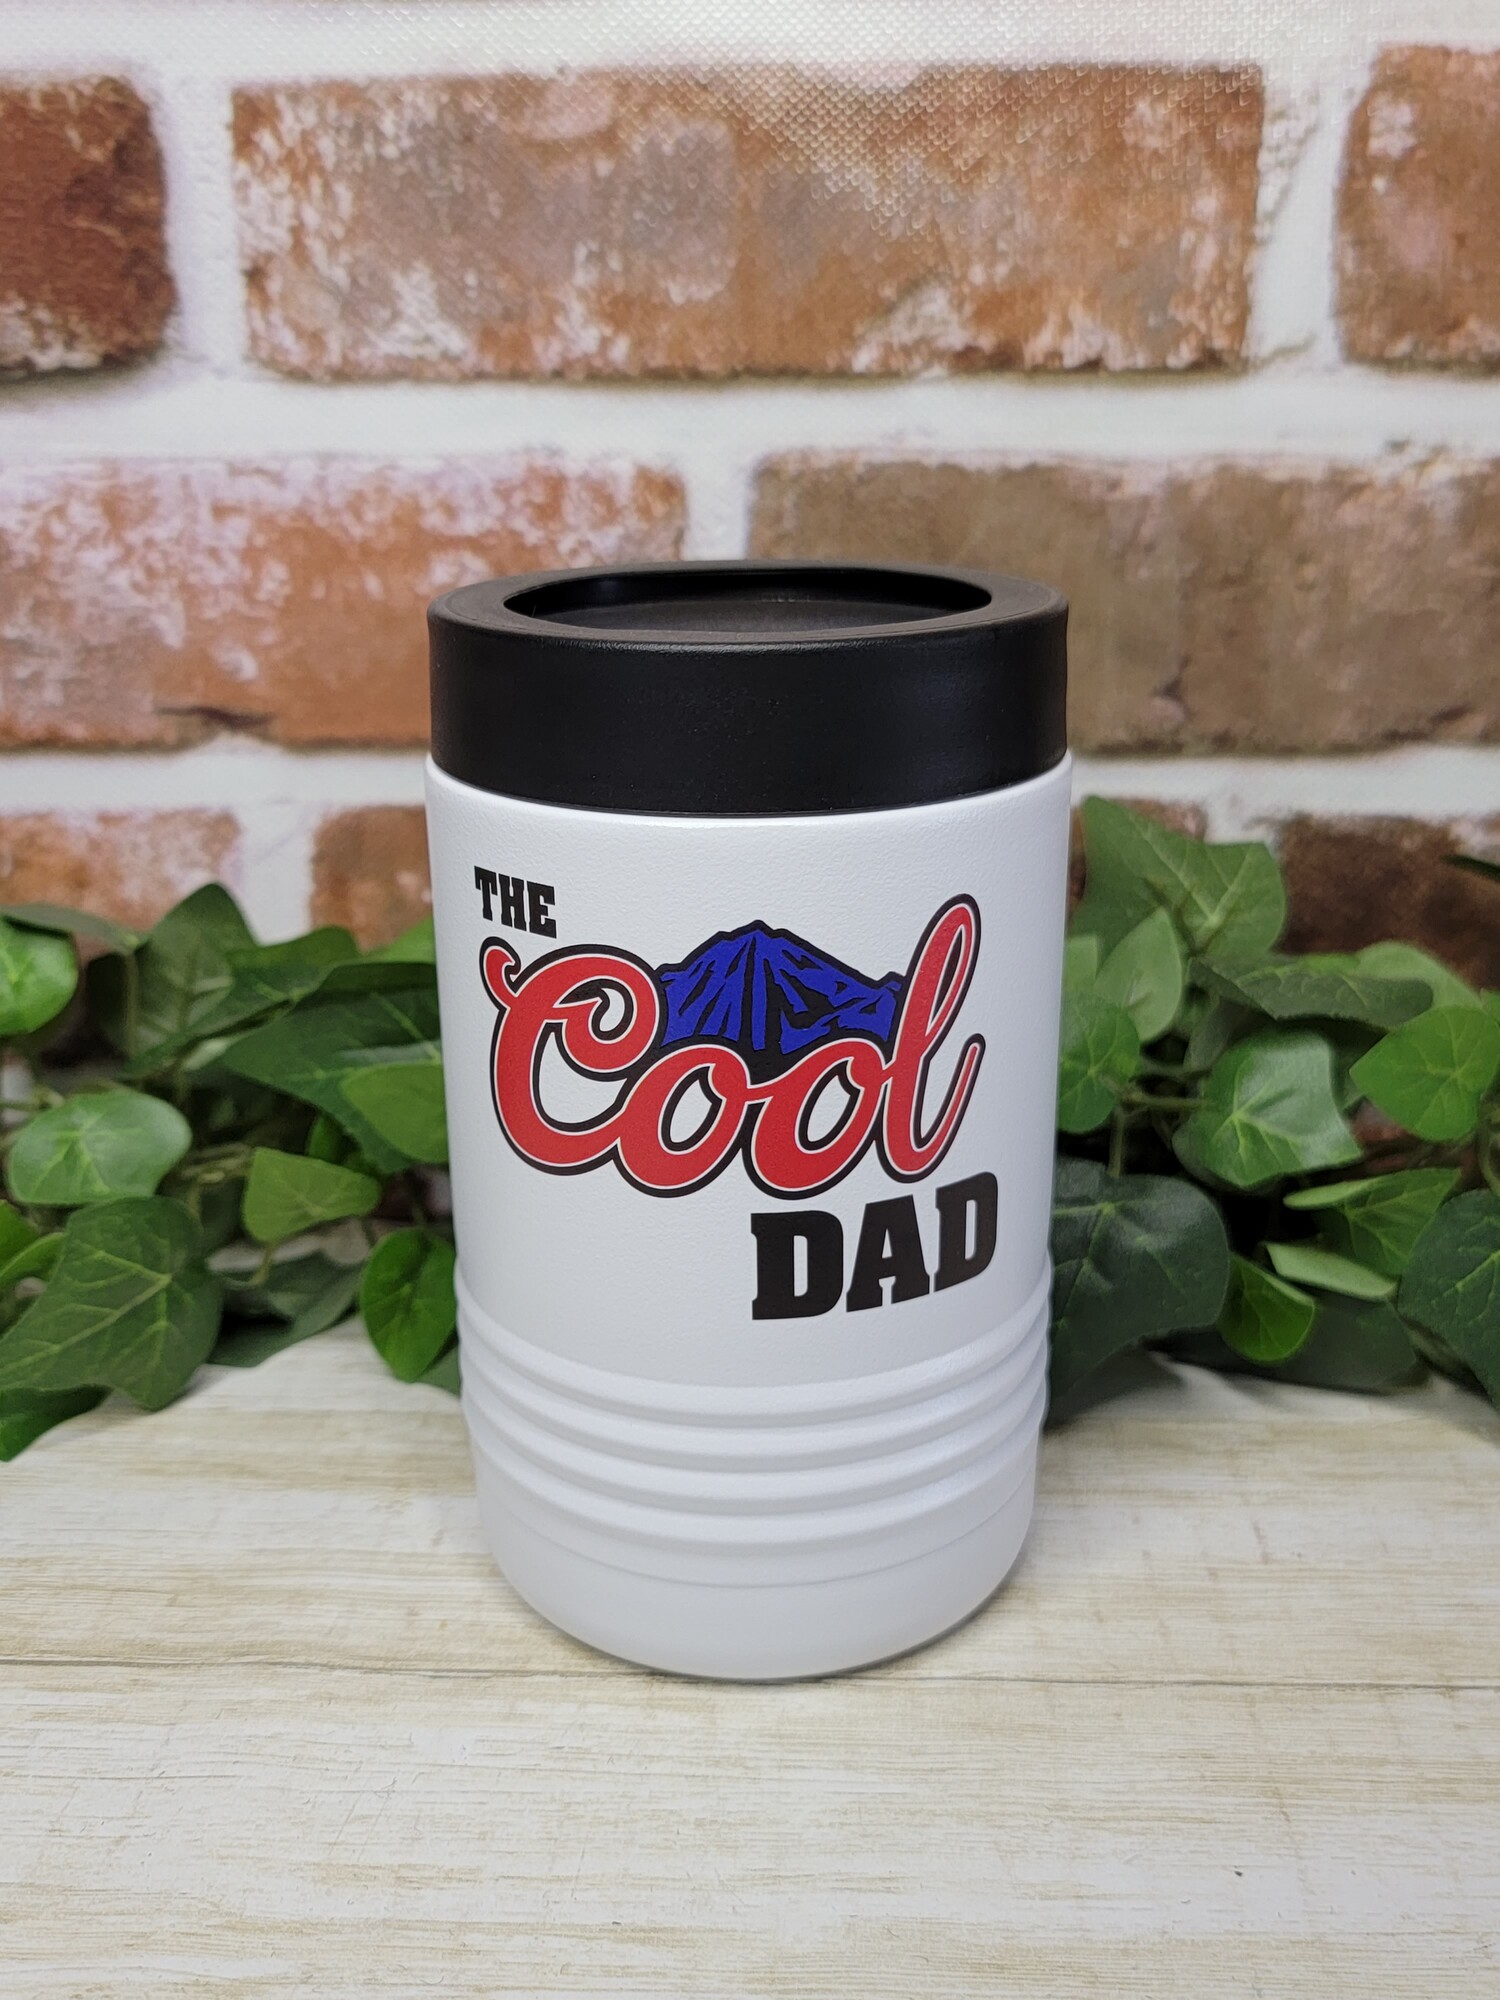 Dad will love his new can cooler. Our can coolers are UV Printed with the image shown of the Cool Dad with blue mountains.

Keep your drinks ice cold longer!
- No sweat Exterior
- Hand wash recommended

We UV Print the cups; so there is no worries of a vinyl decal peeling or coming off.